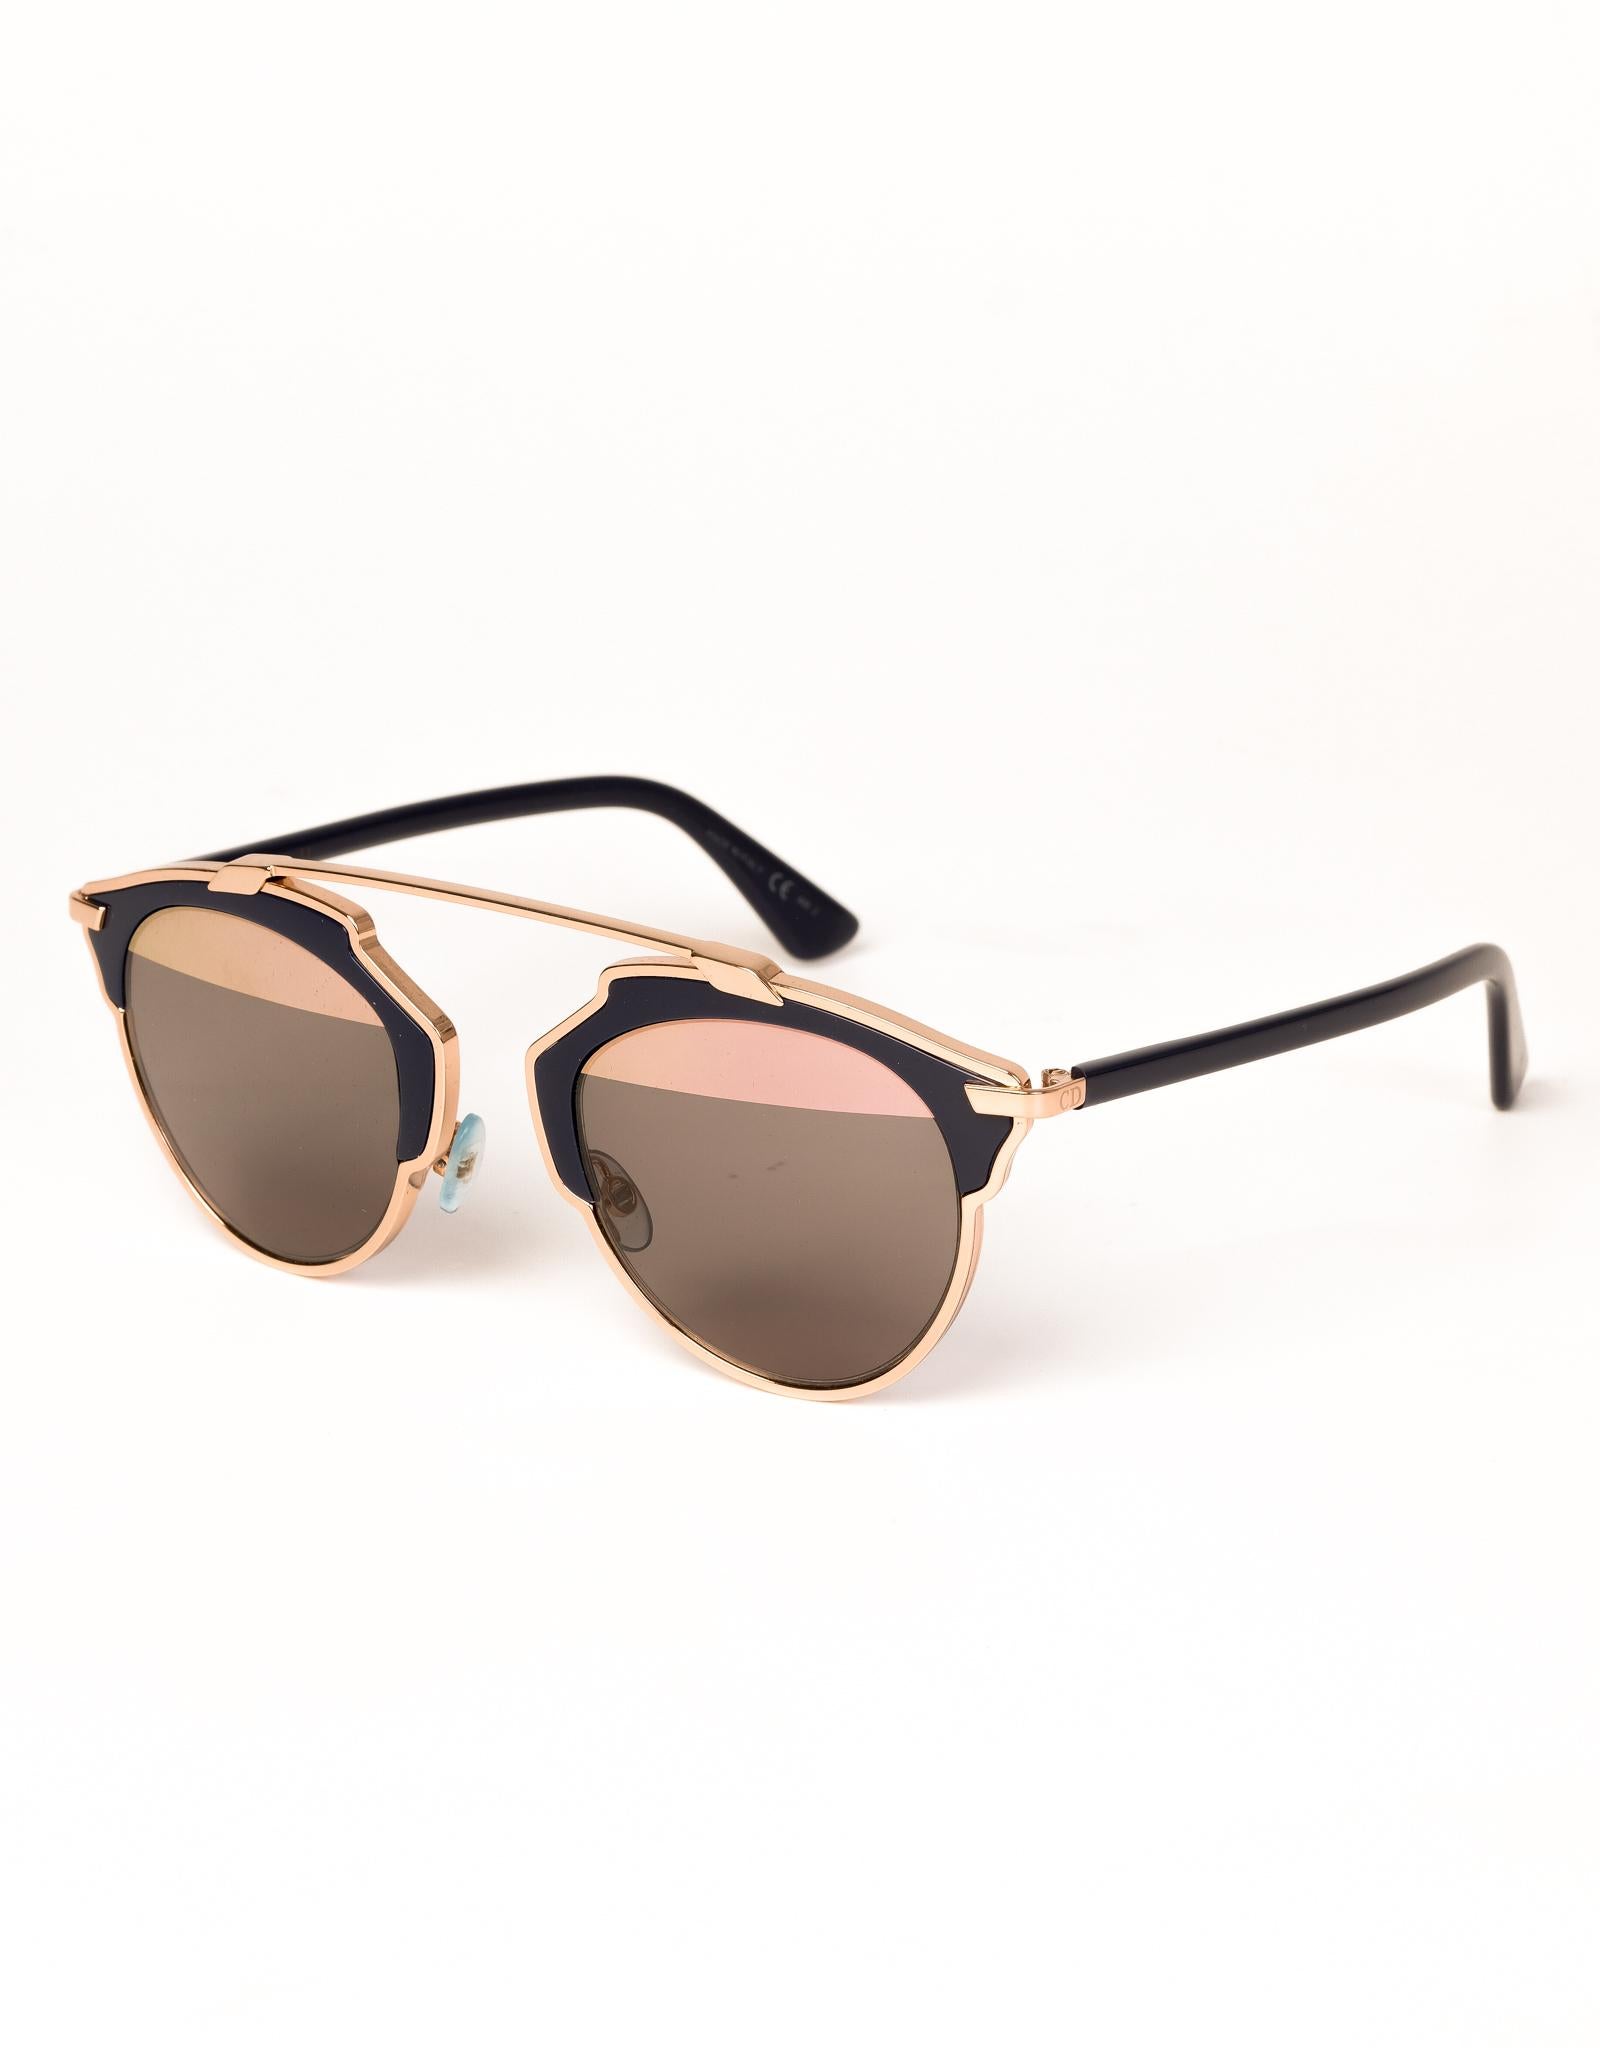 Dior So Real Sunglasses beautifully crafted & made from the finest quality materials & show exquisite detail from any angle. These iconic DIORSOREAL sunglasses are made with lightweight acetate & metal in black and gold. Featuring exquisite detail